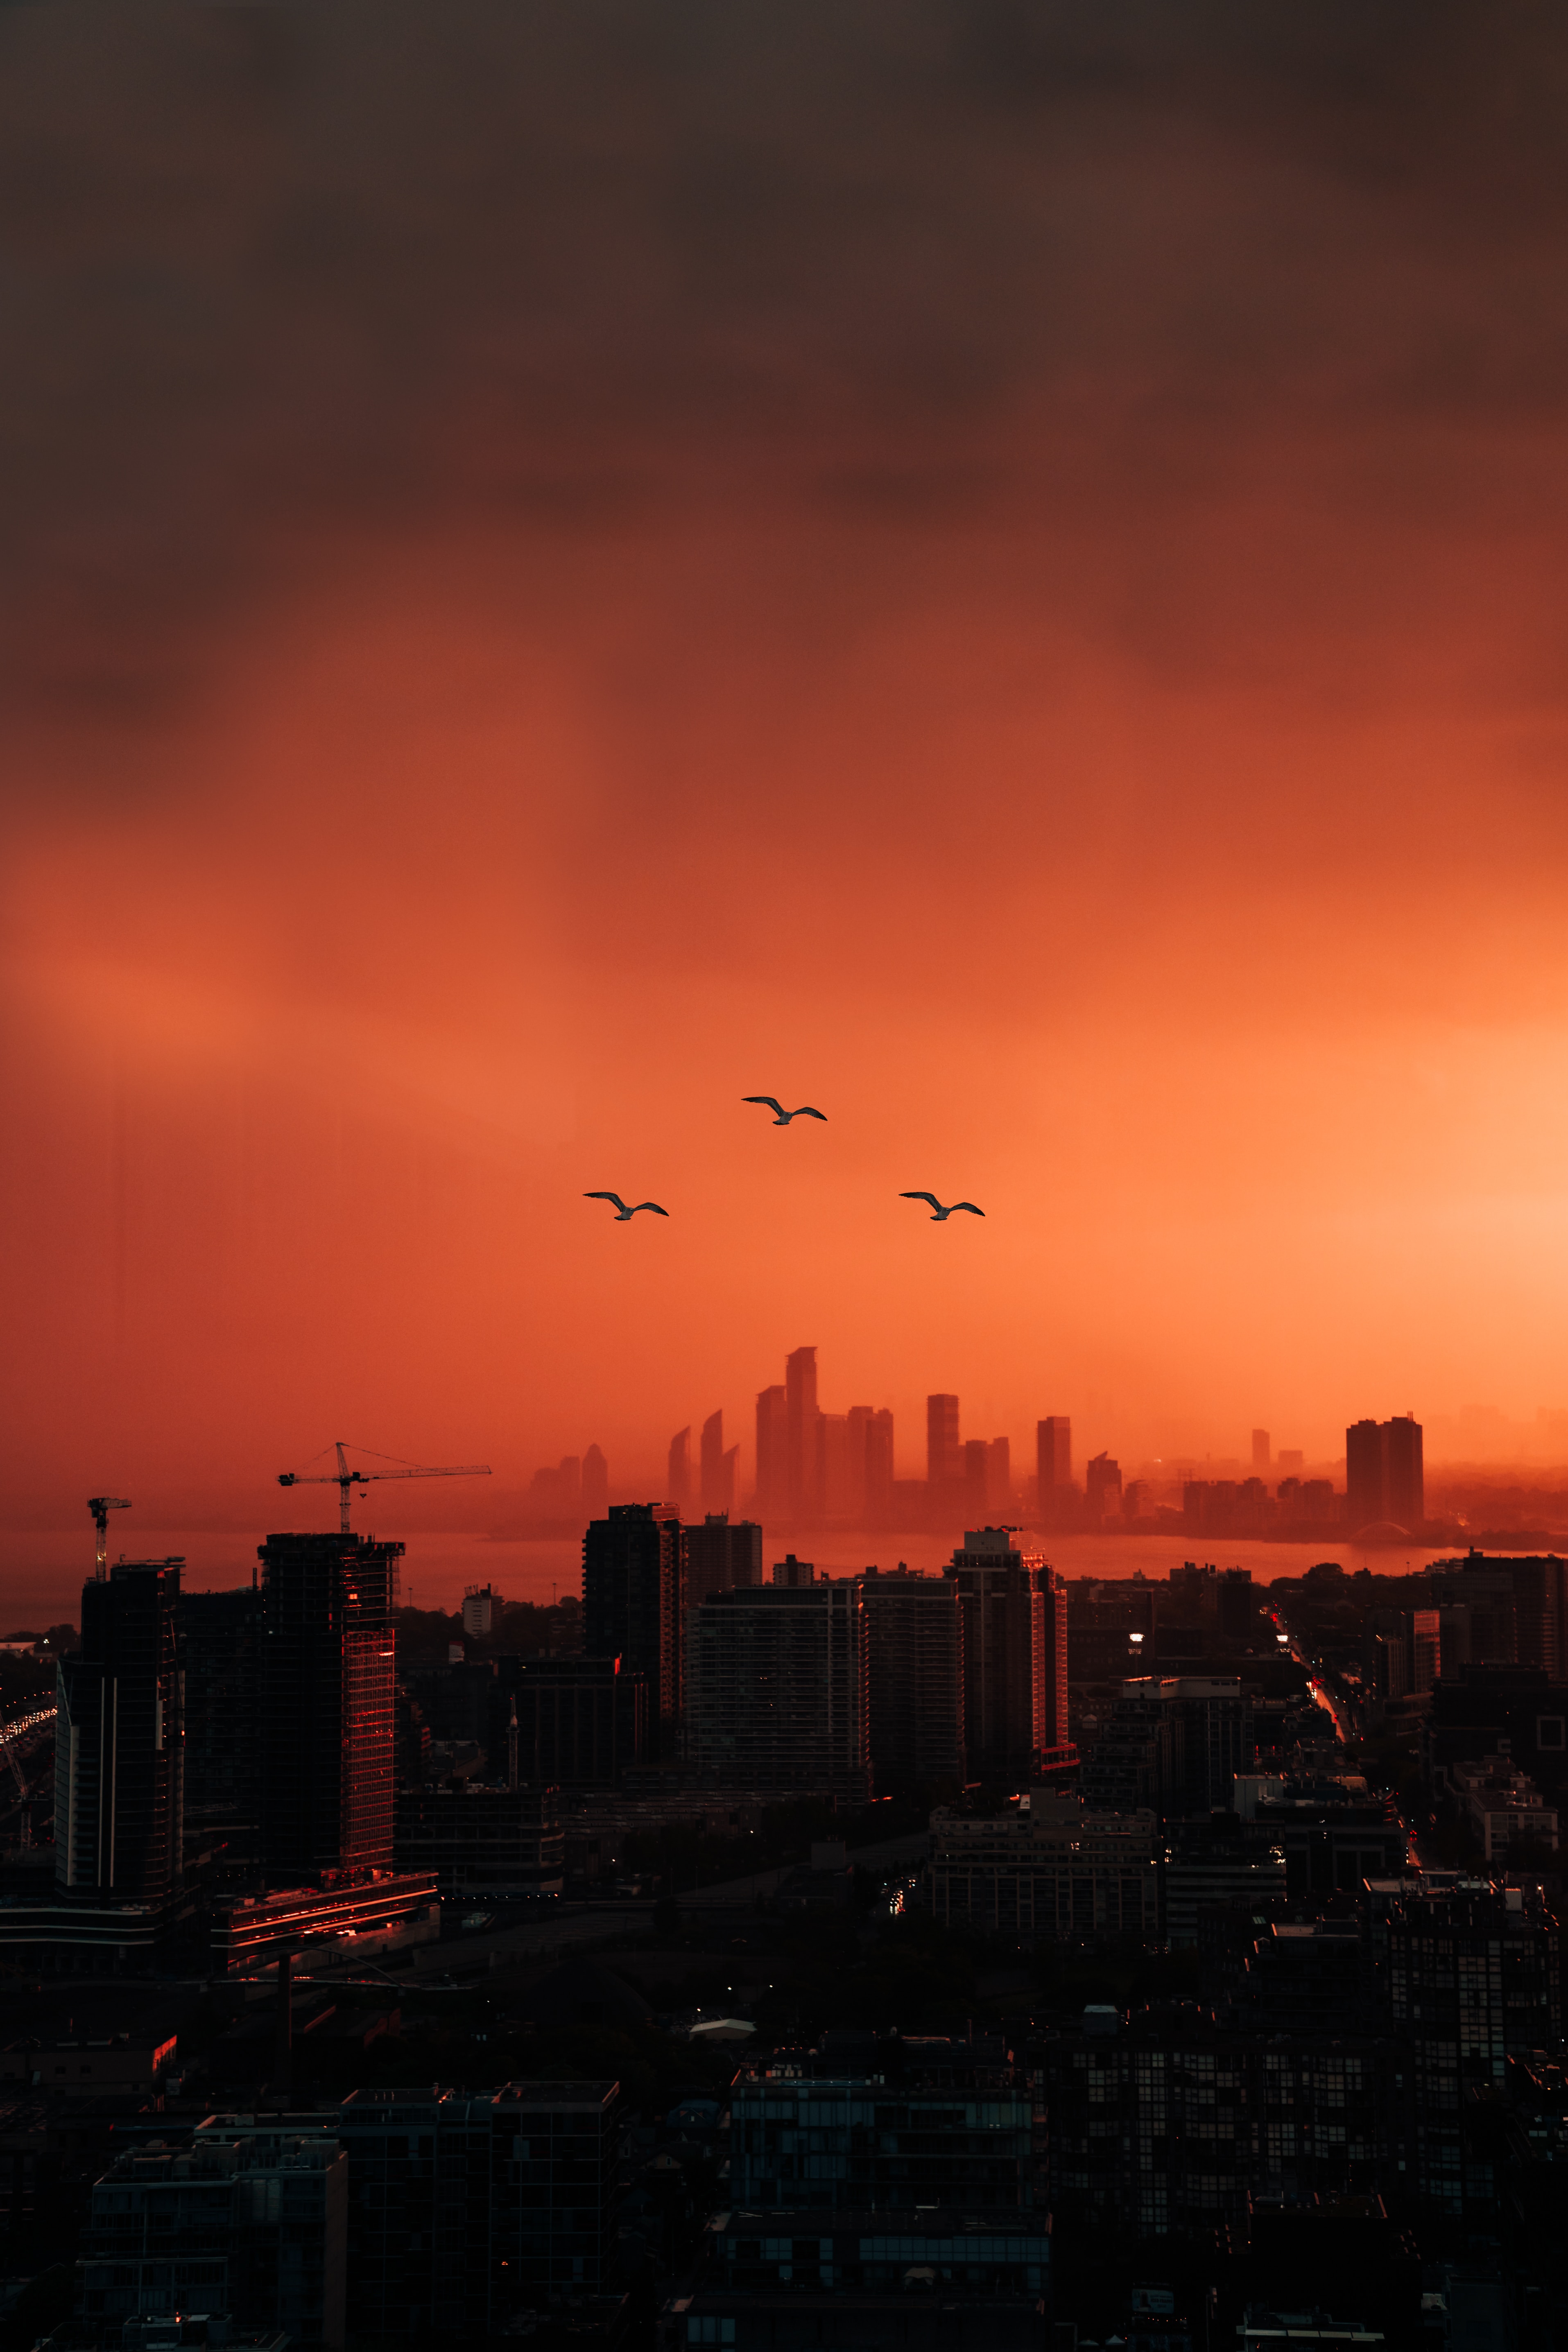 154279 download wallpaper birds, cities, sunset, twilight, city, building, view from above, dusk screensavers and pictures for free